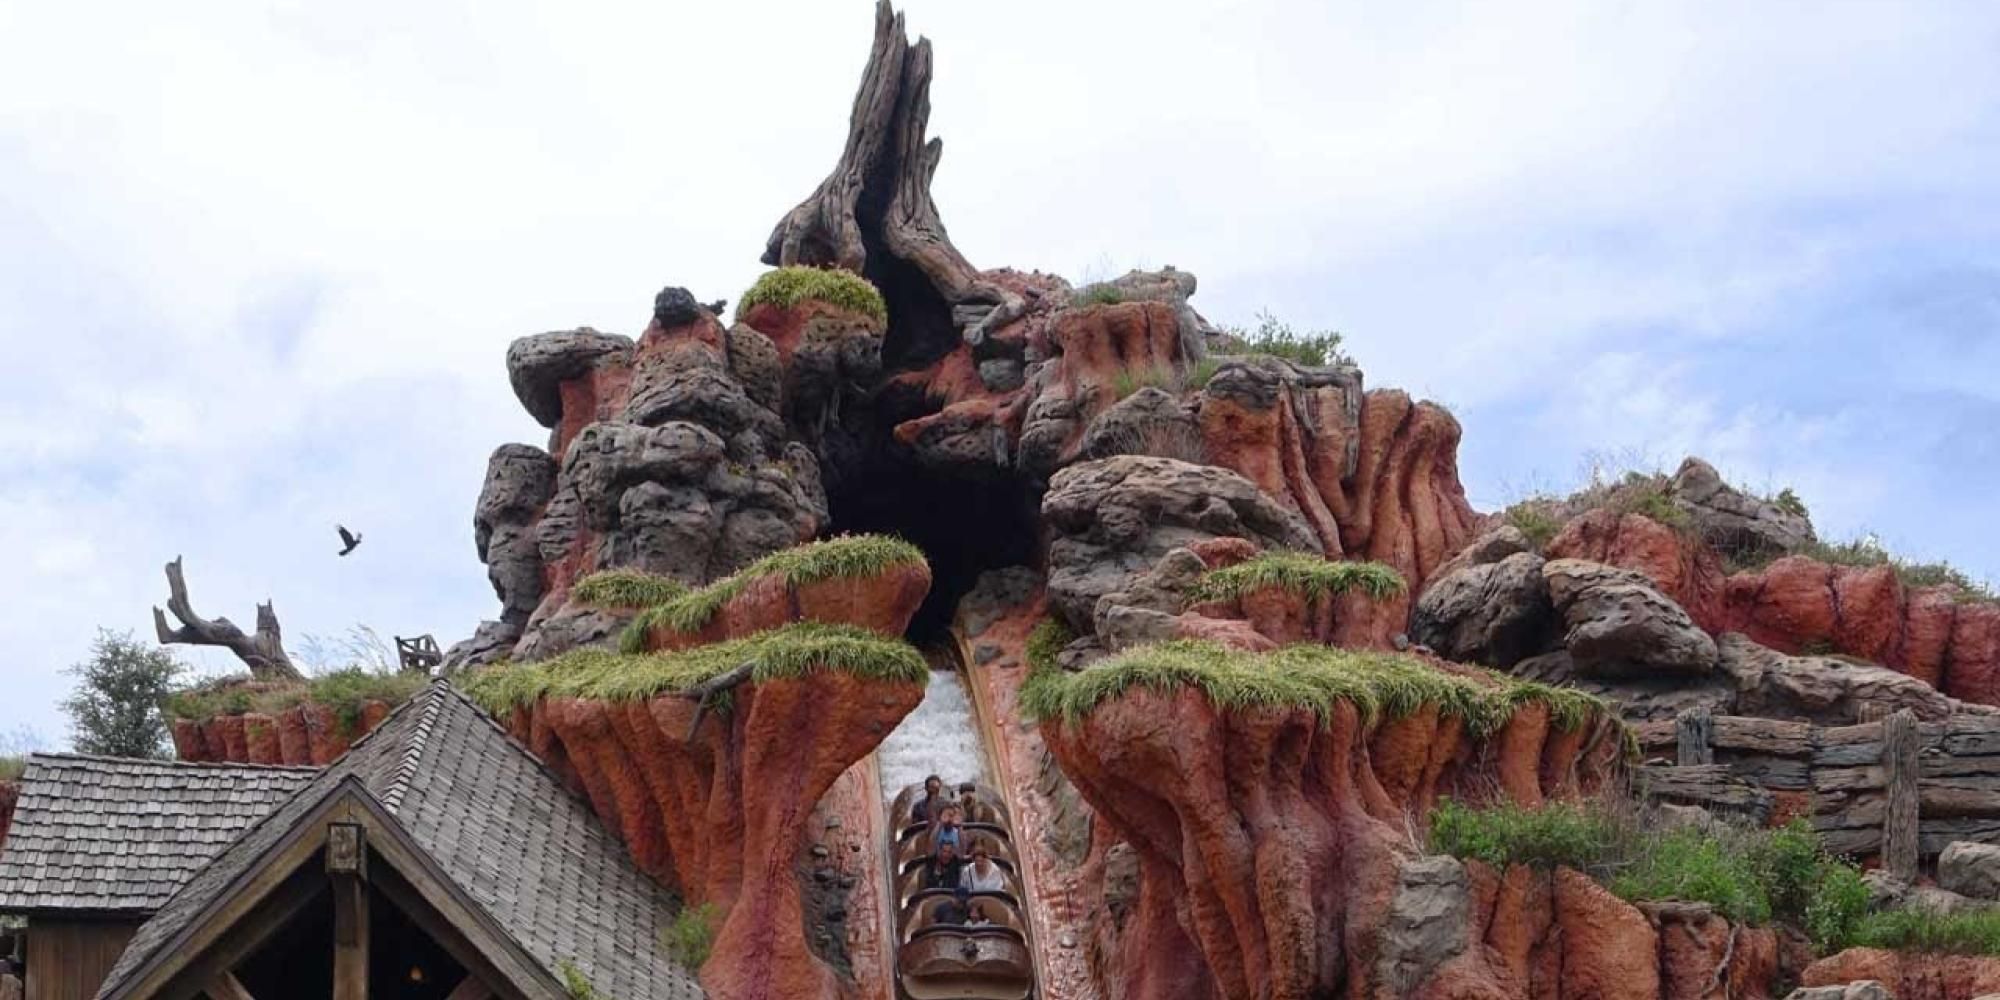 A shot from the outside of Splash Mountain at Disney World